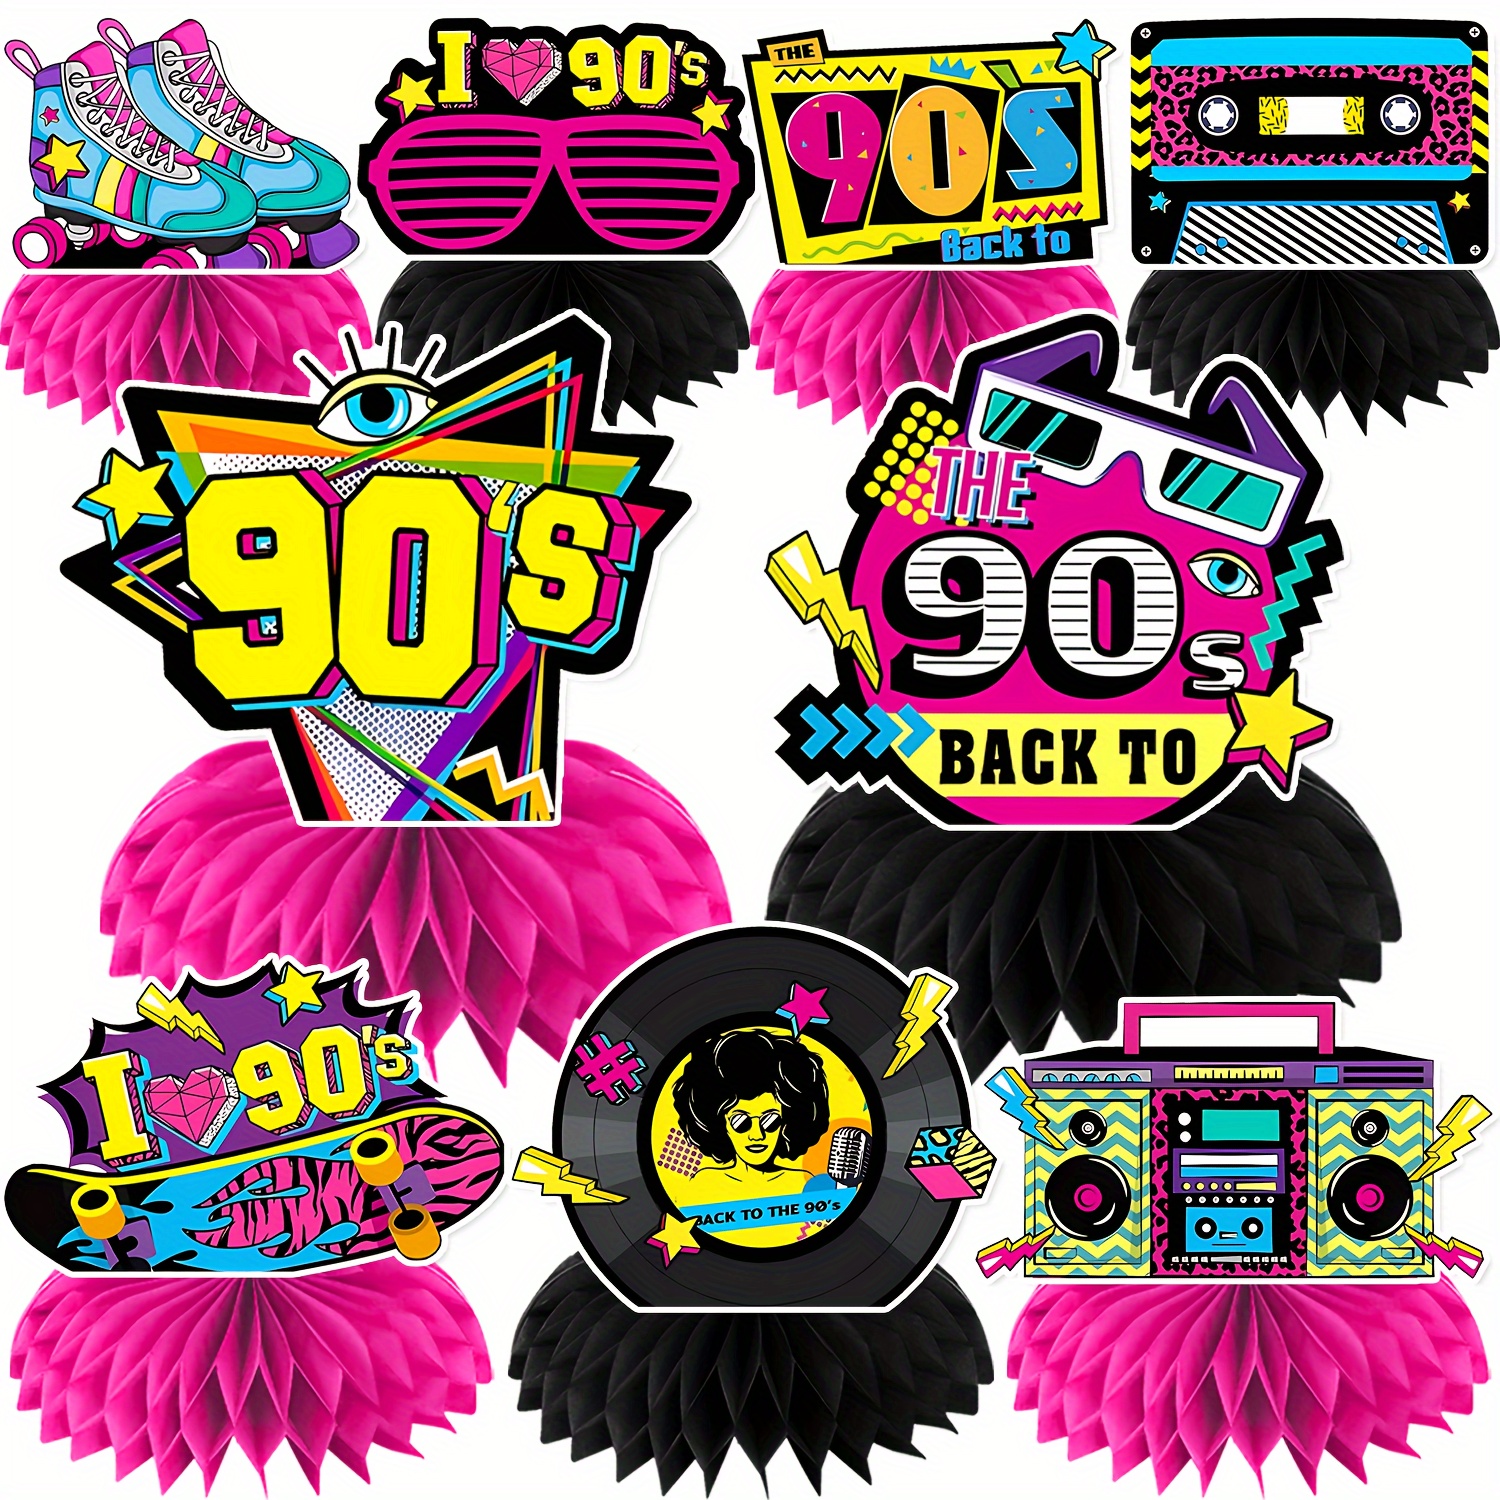 

9-pack Retro 90s Honeycomb Centerpieces - Nostalgic Paper Table Decor For 90's Theme Parties, Birthday Celebrations, Bar & - Colorful Party Supplies, Universal Holiday Appeal, No Electricity Needed